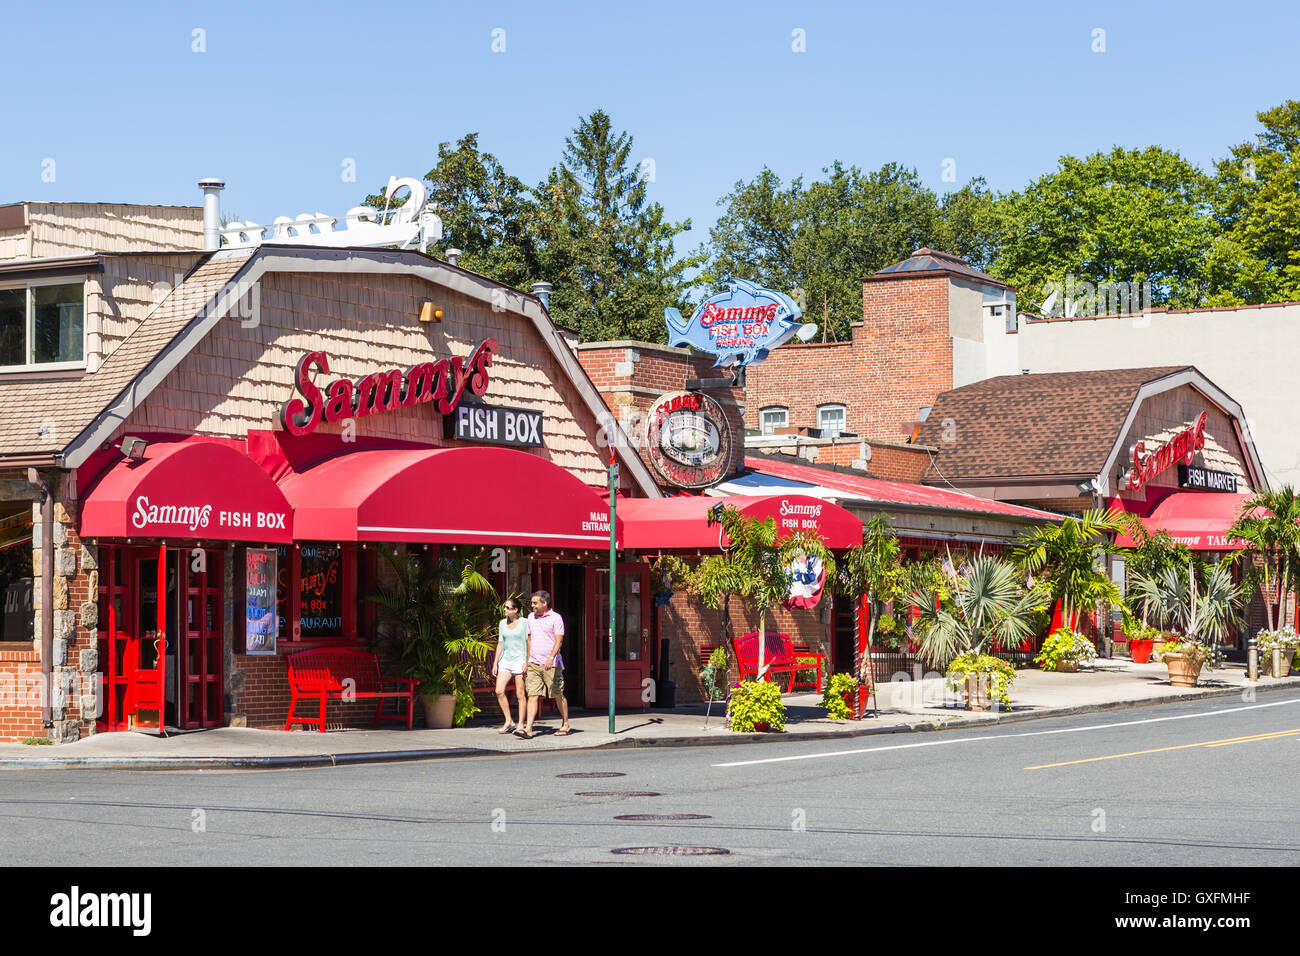 The main entrance to Sammy's Fish Box, a seafood restaurant and Sammy's Fish Market on City Island in the Bronx, New York City. Stock Photo